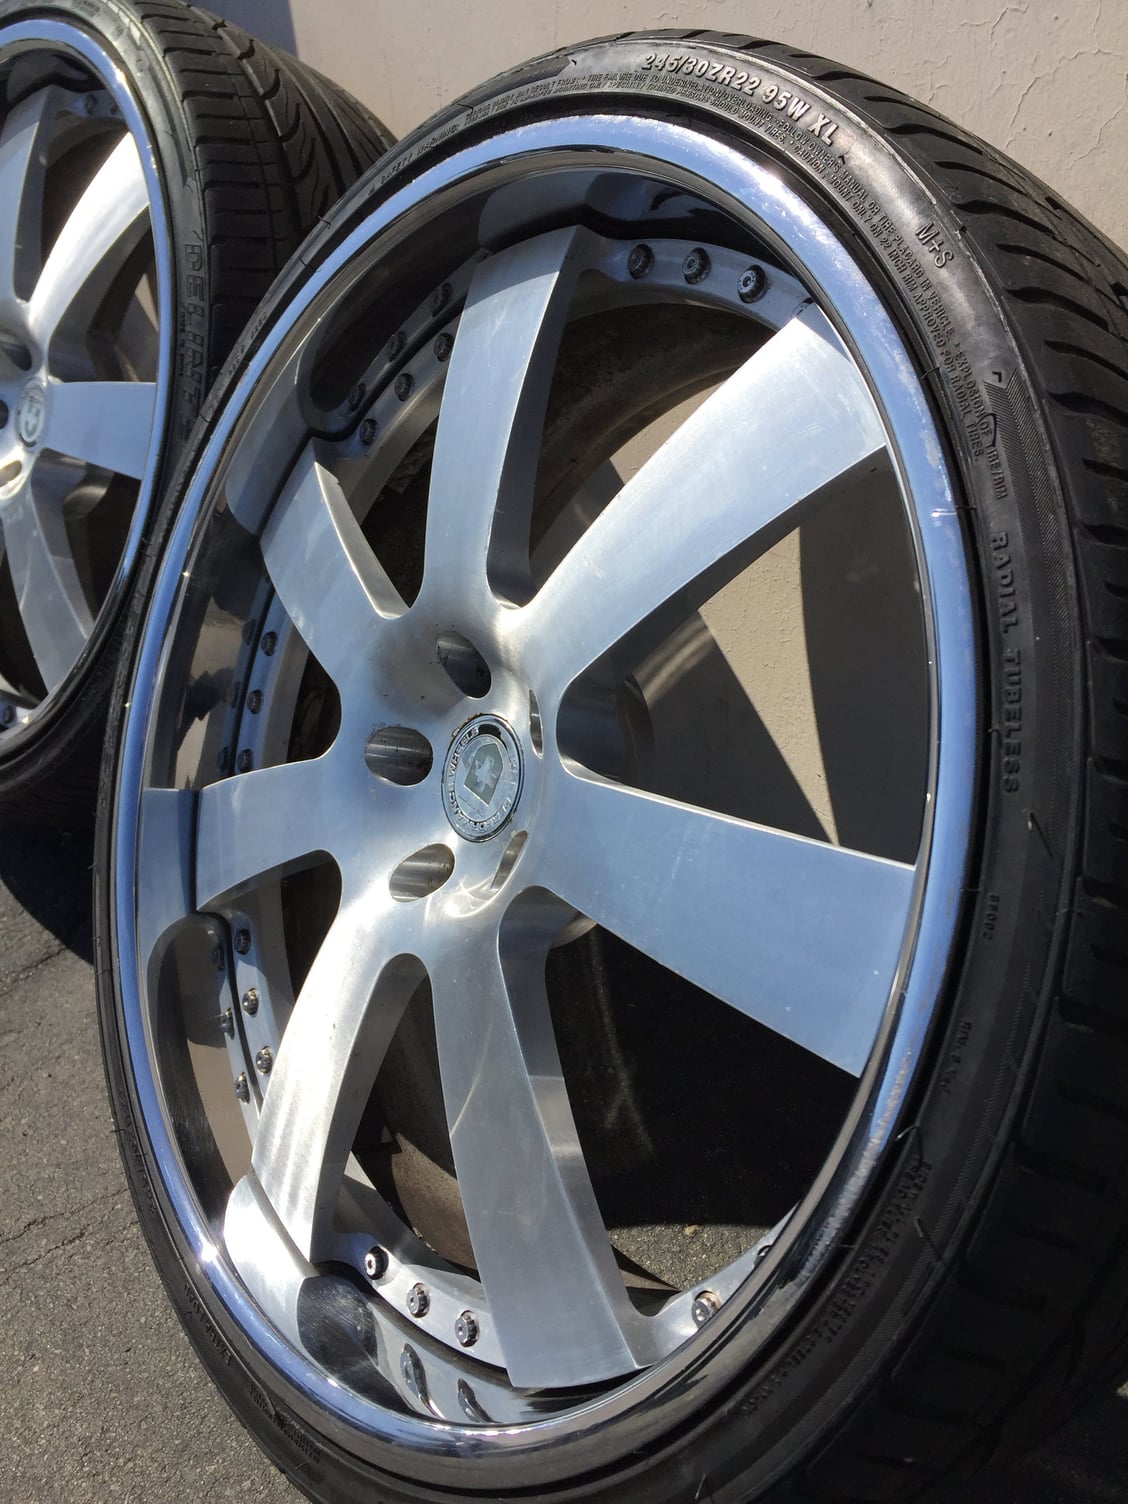 Wheels and Tires/Axles - 22" HRE #948R 3-Pc Wheels and Tires - Polished Lip with Brushed Center - S550 W221 - Used - 2007 to 2013 Mercedes-Benz S550 - Huntington Beach, CA 92649, United States